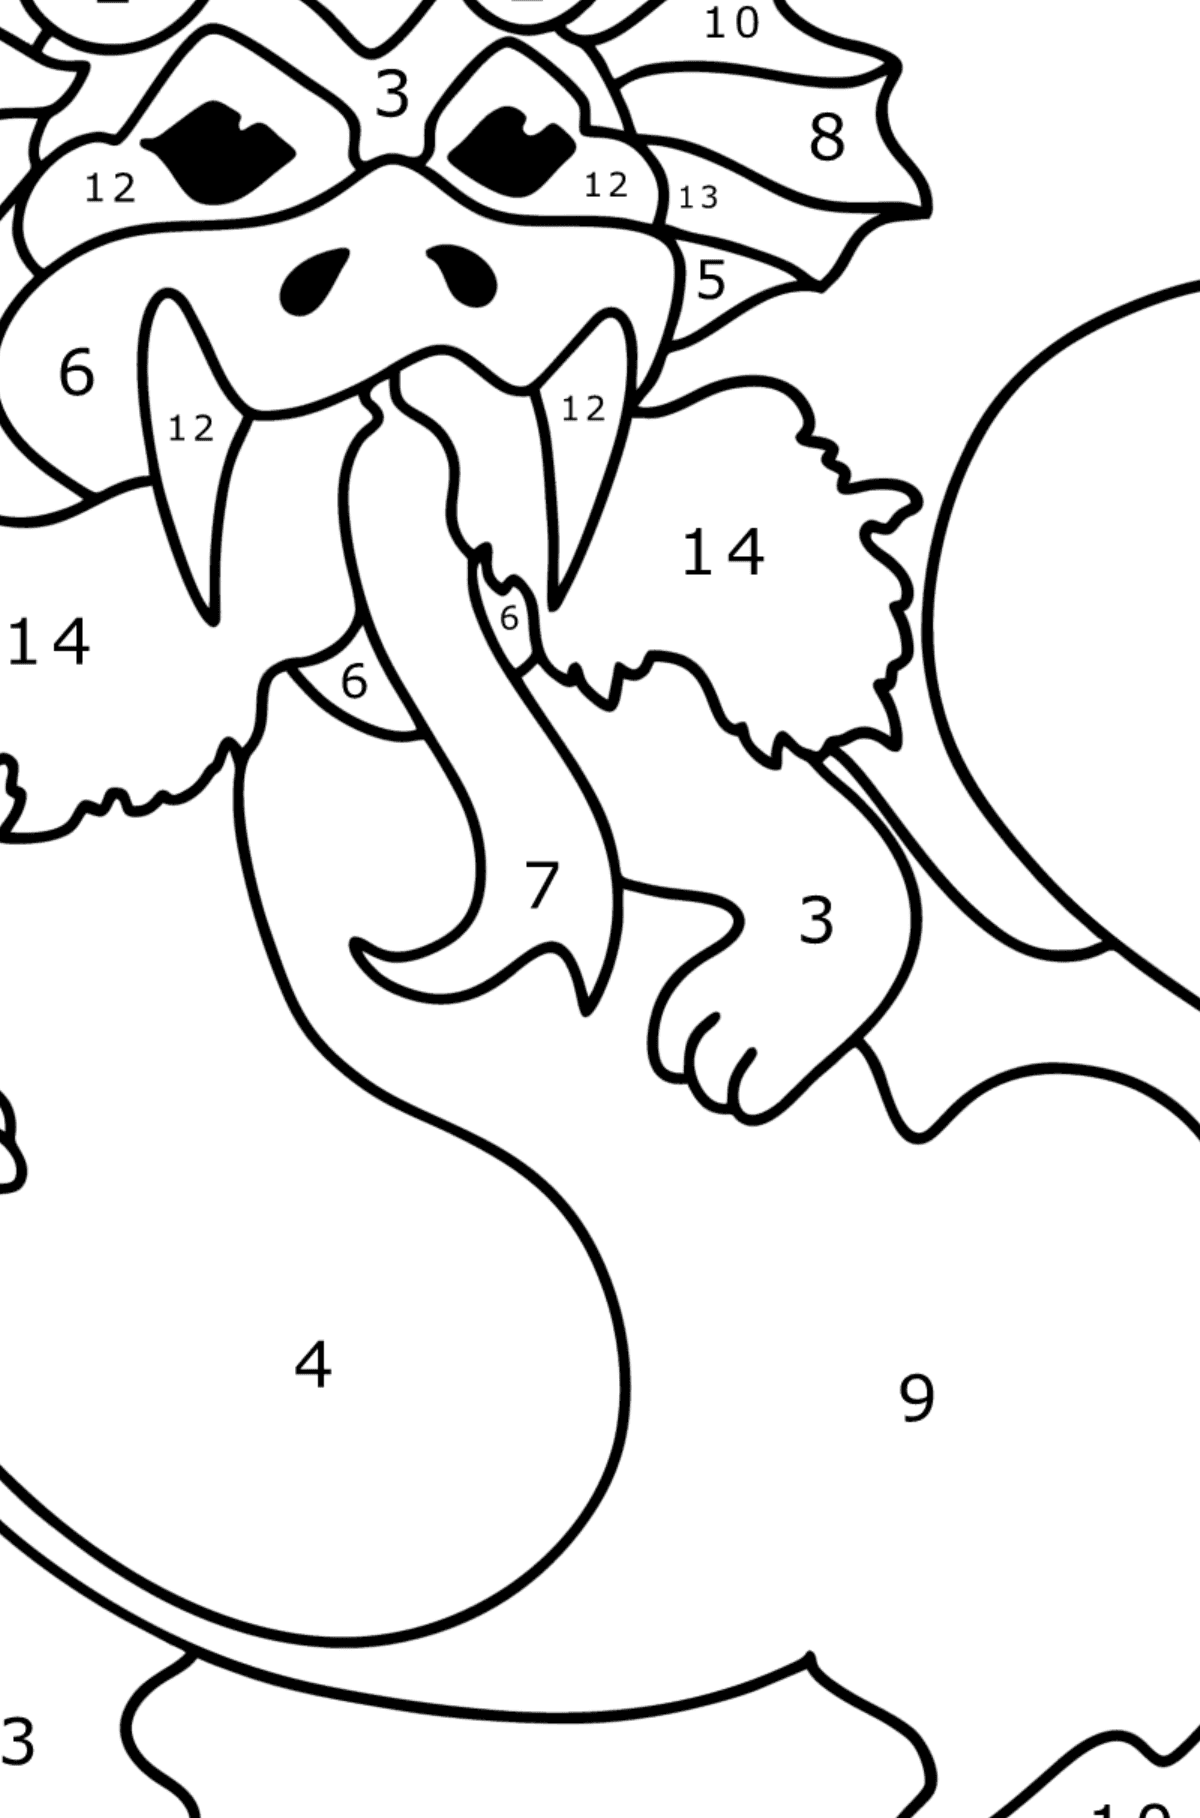 The dragon starts fire coloring page - Coloring by Numbers for Kids